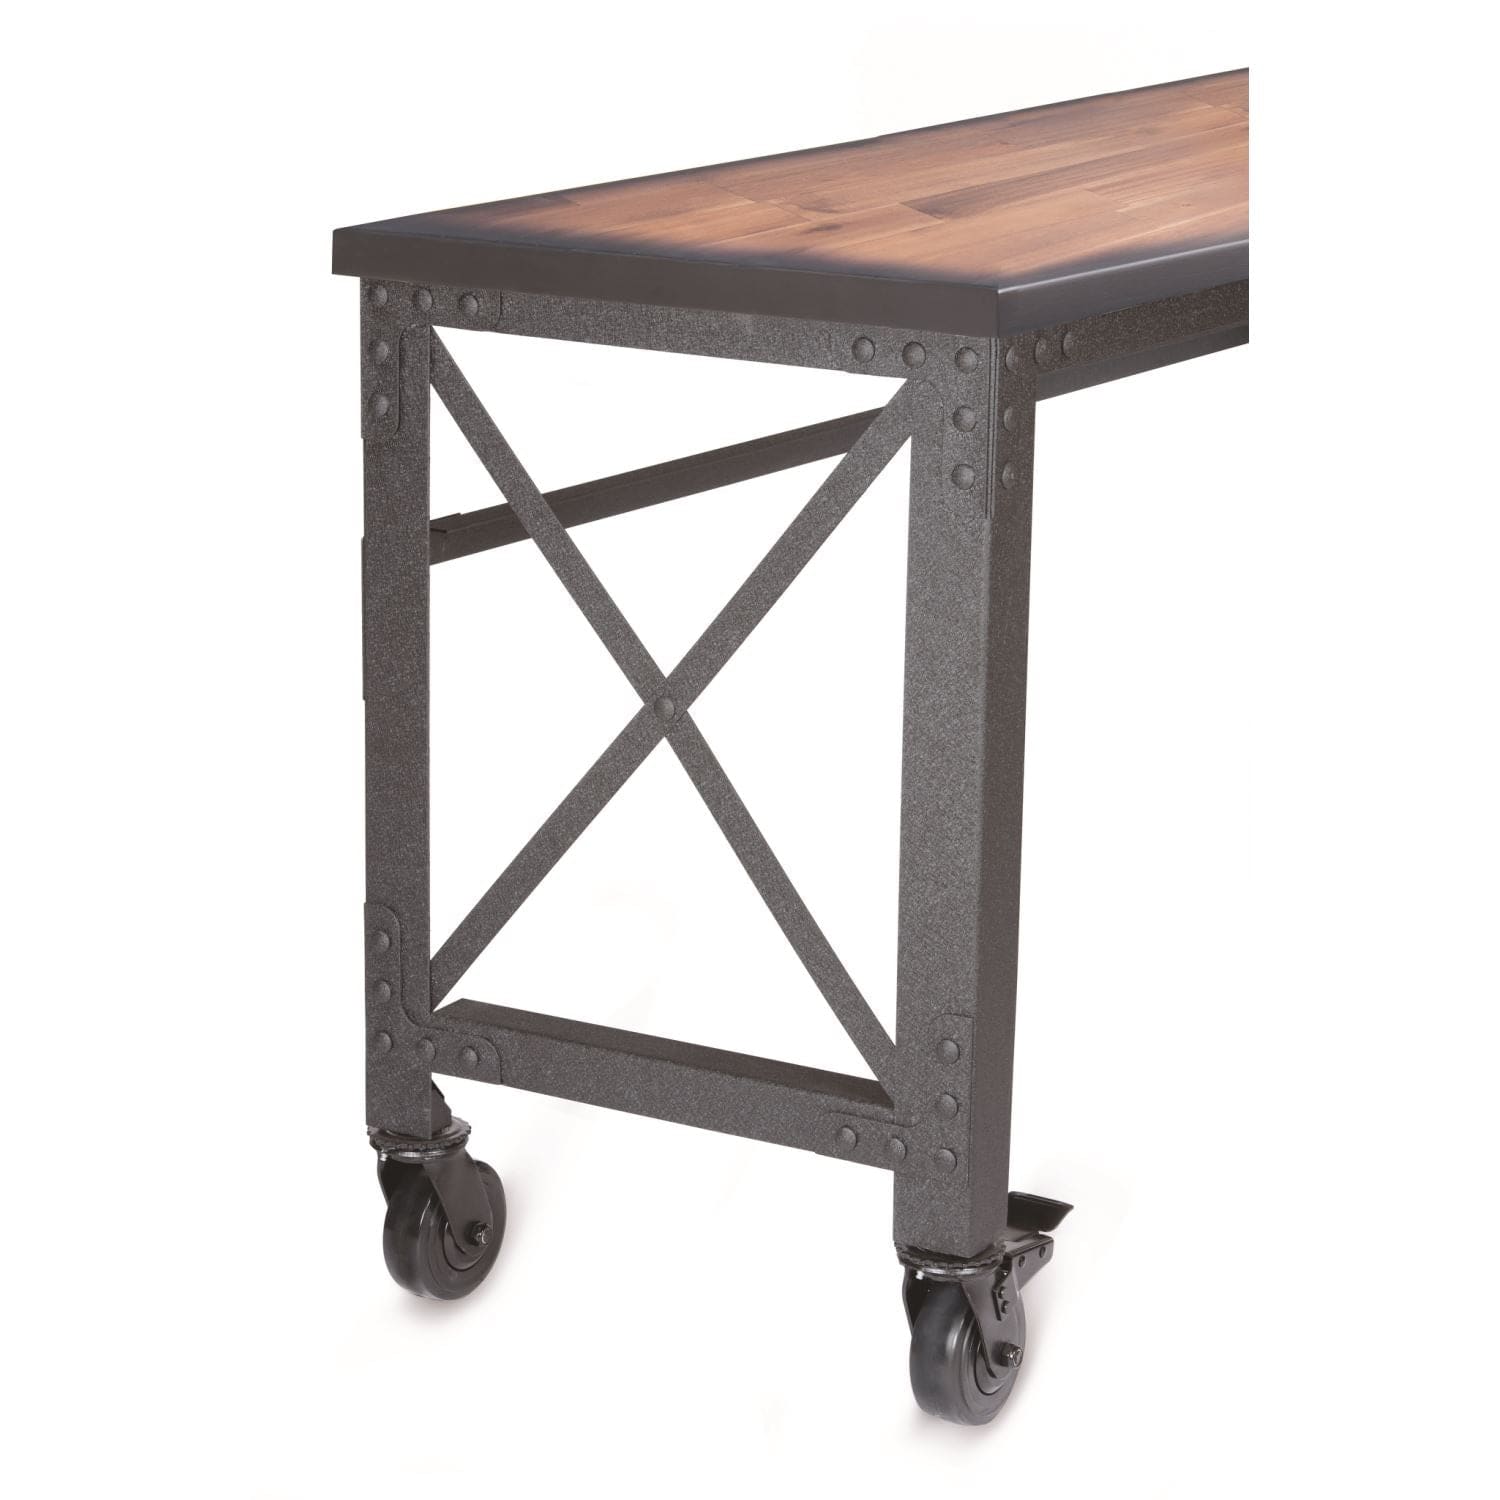 Duramax Furnitures DuraMax | 52 In. x 24 In. Rolling Industrial Worktable Desk with Solid Wood Top 68022